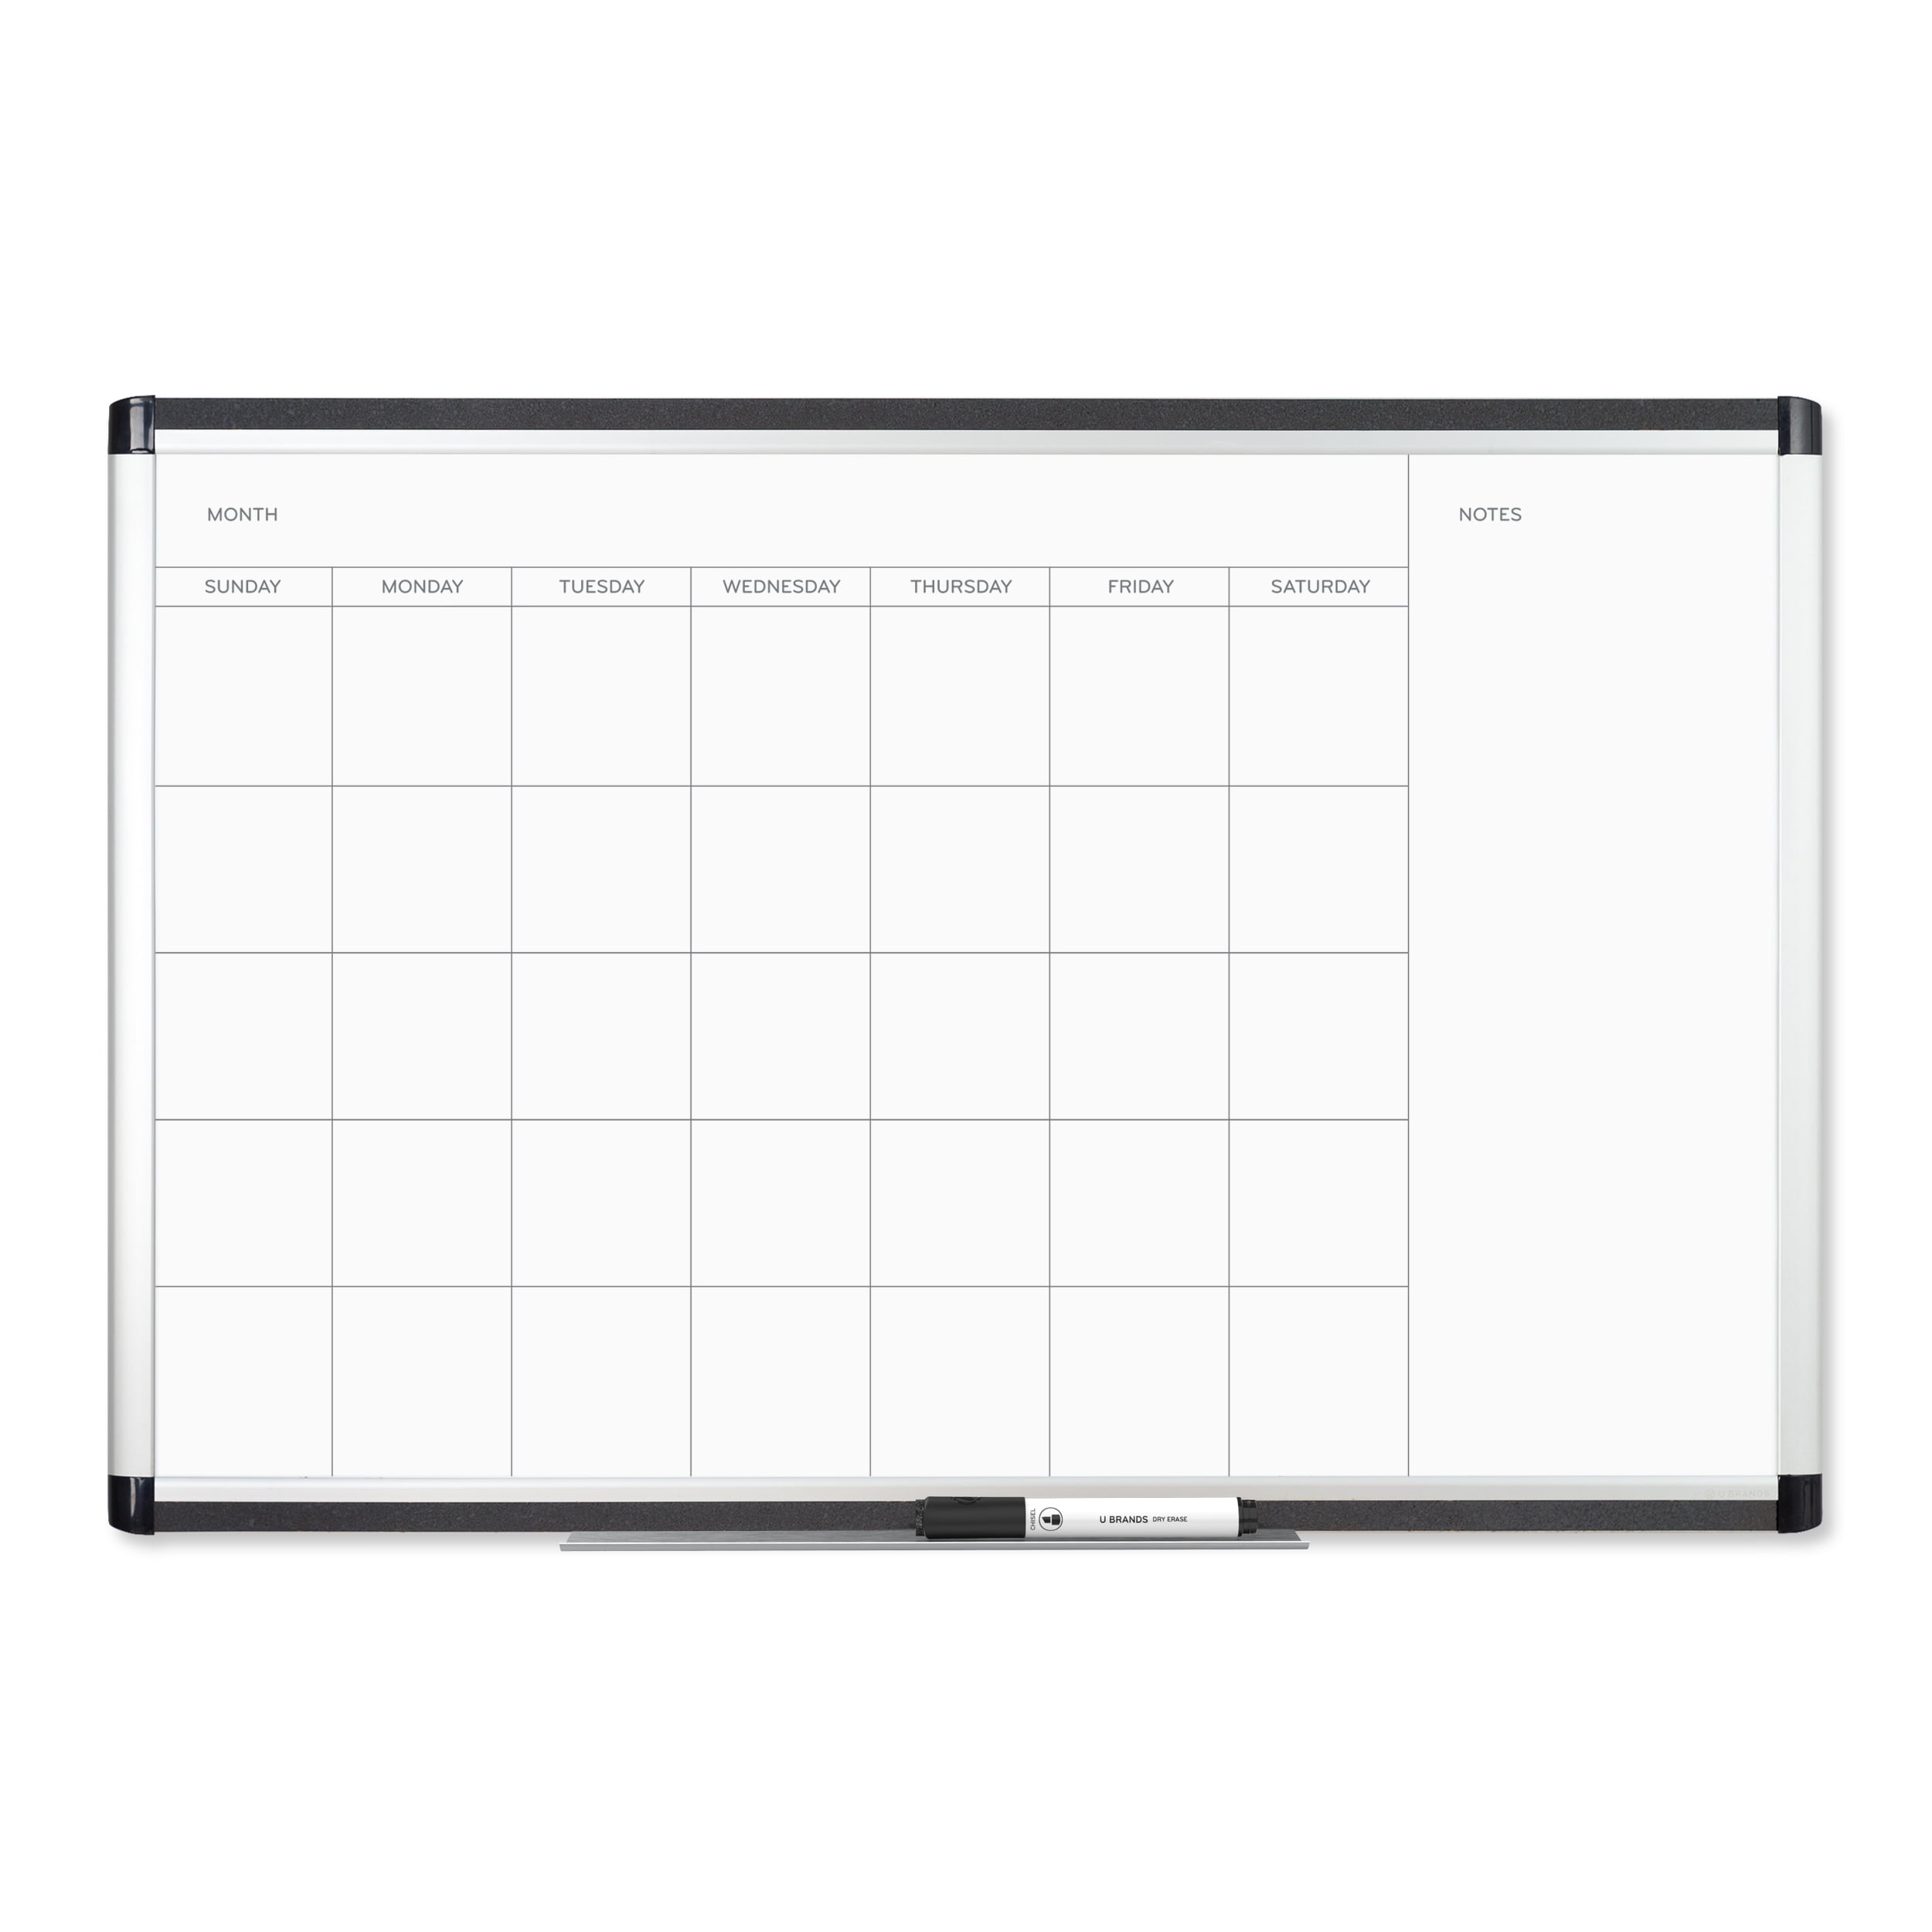 Wipe 24 x 36 Inch WallDeca Monthly Dry Erase Wall Calendar Planner Whiteboard 